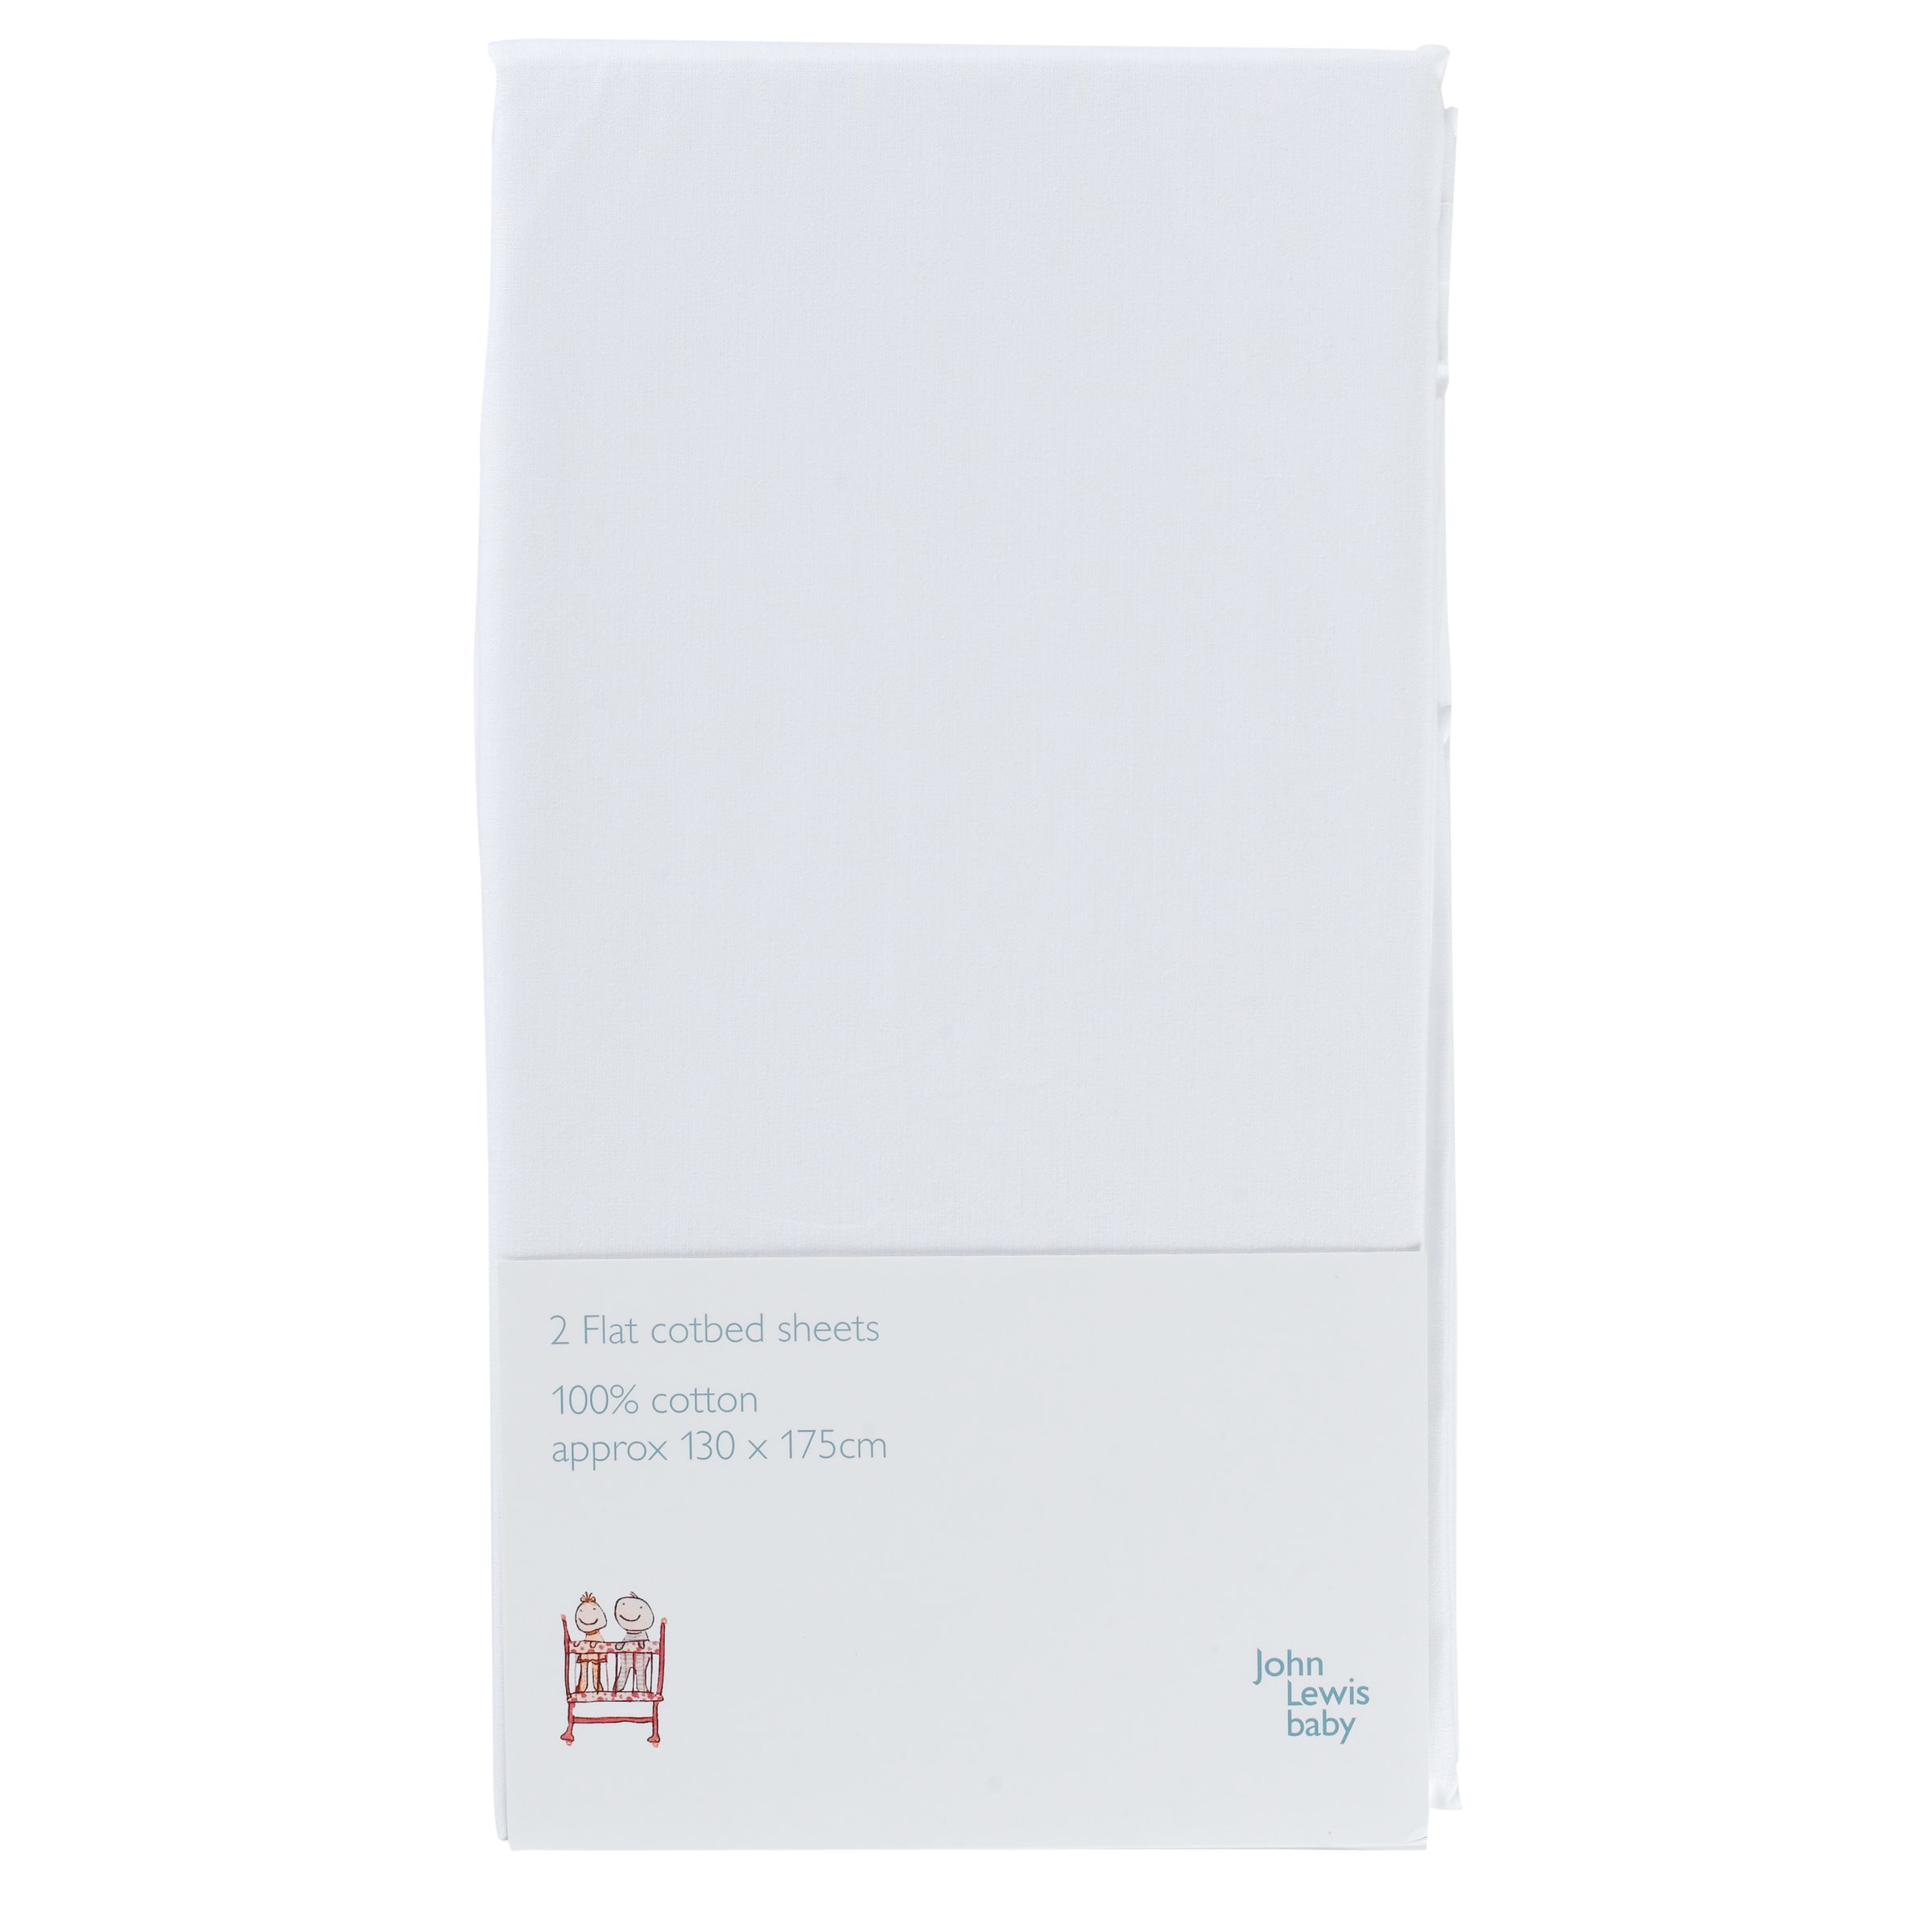 John Lewis Baby Flat Cotbed Sheet, Pack of 2,